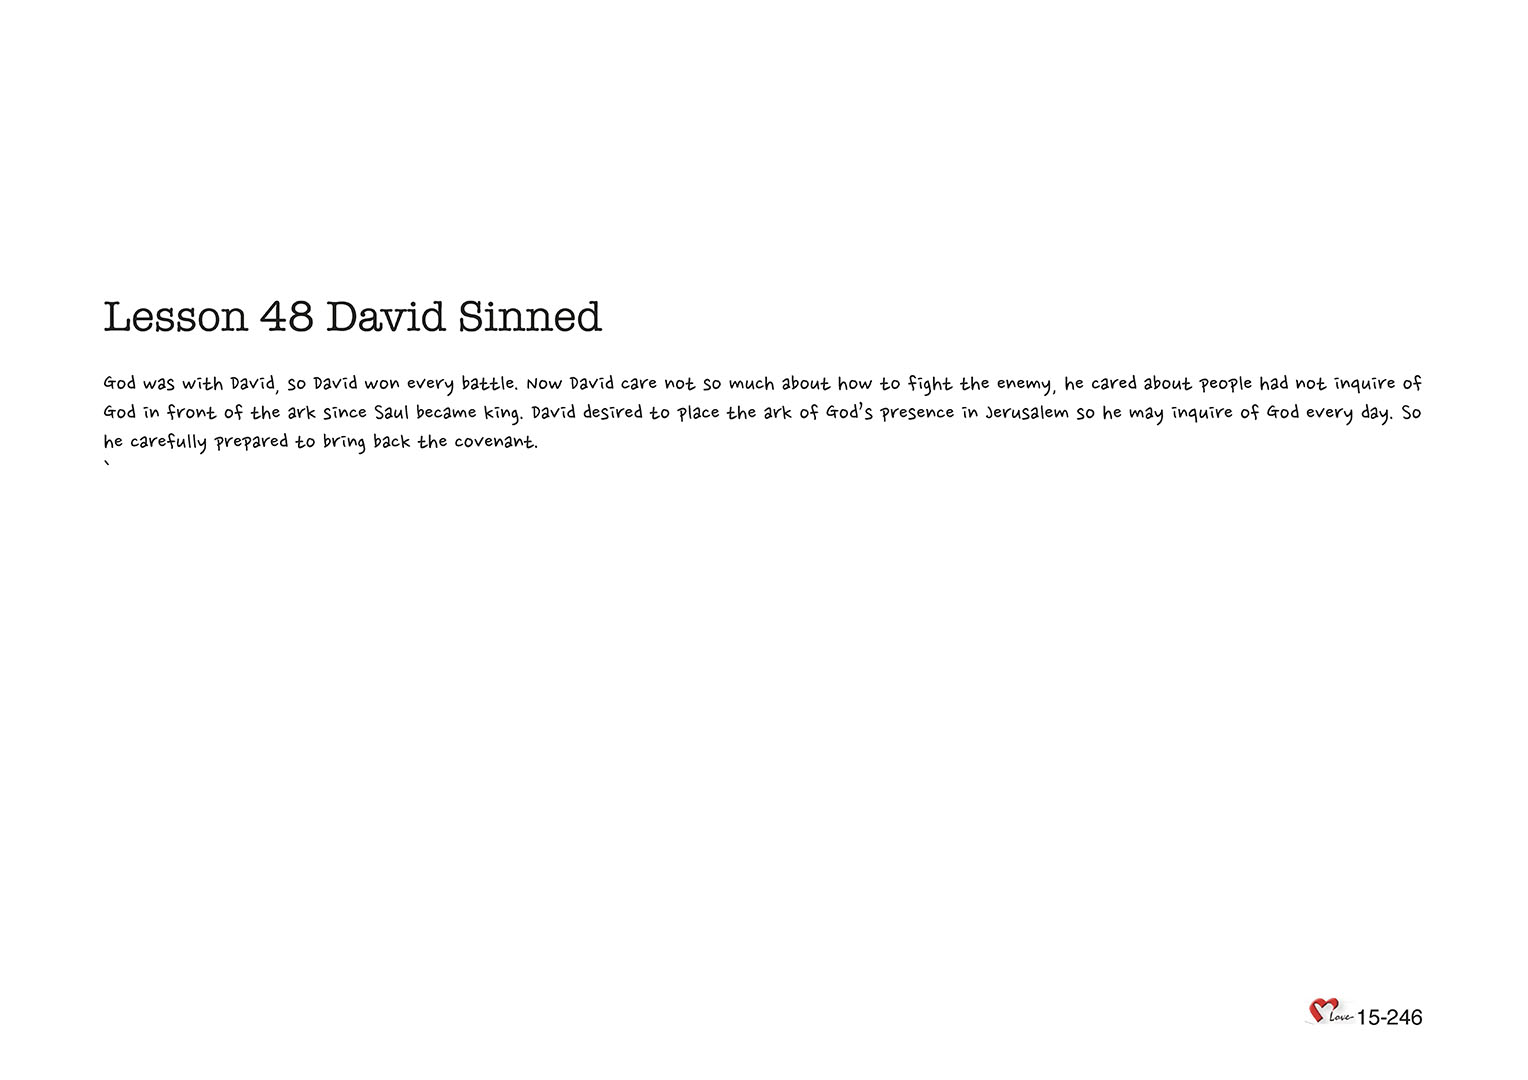 Chapter 15 - Lesson 48 - David Sinned